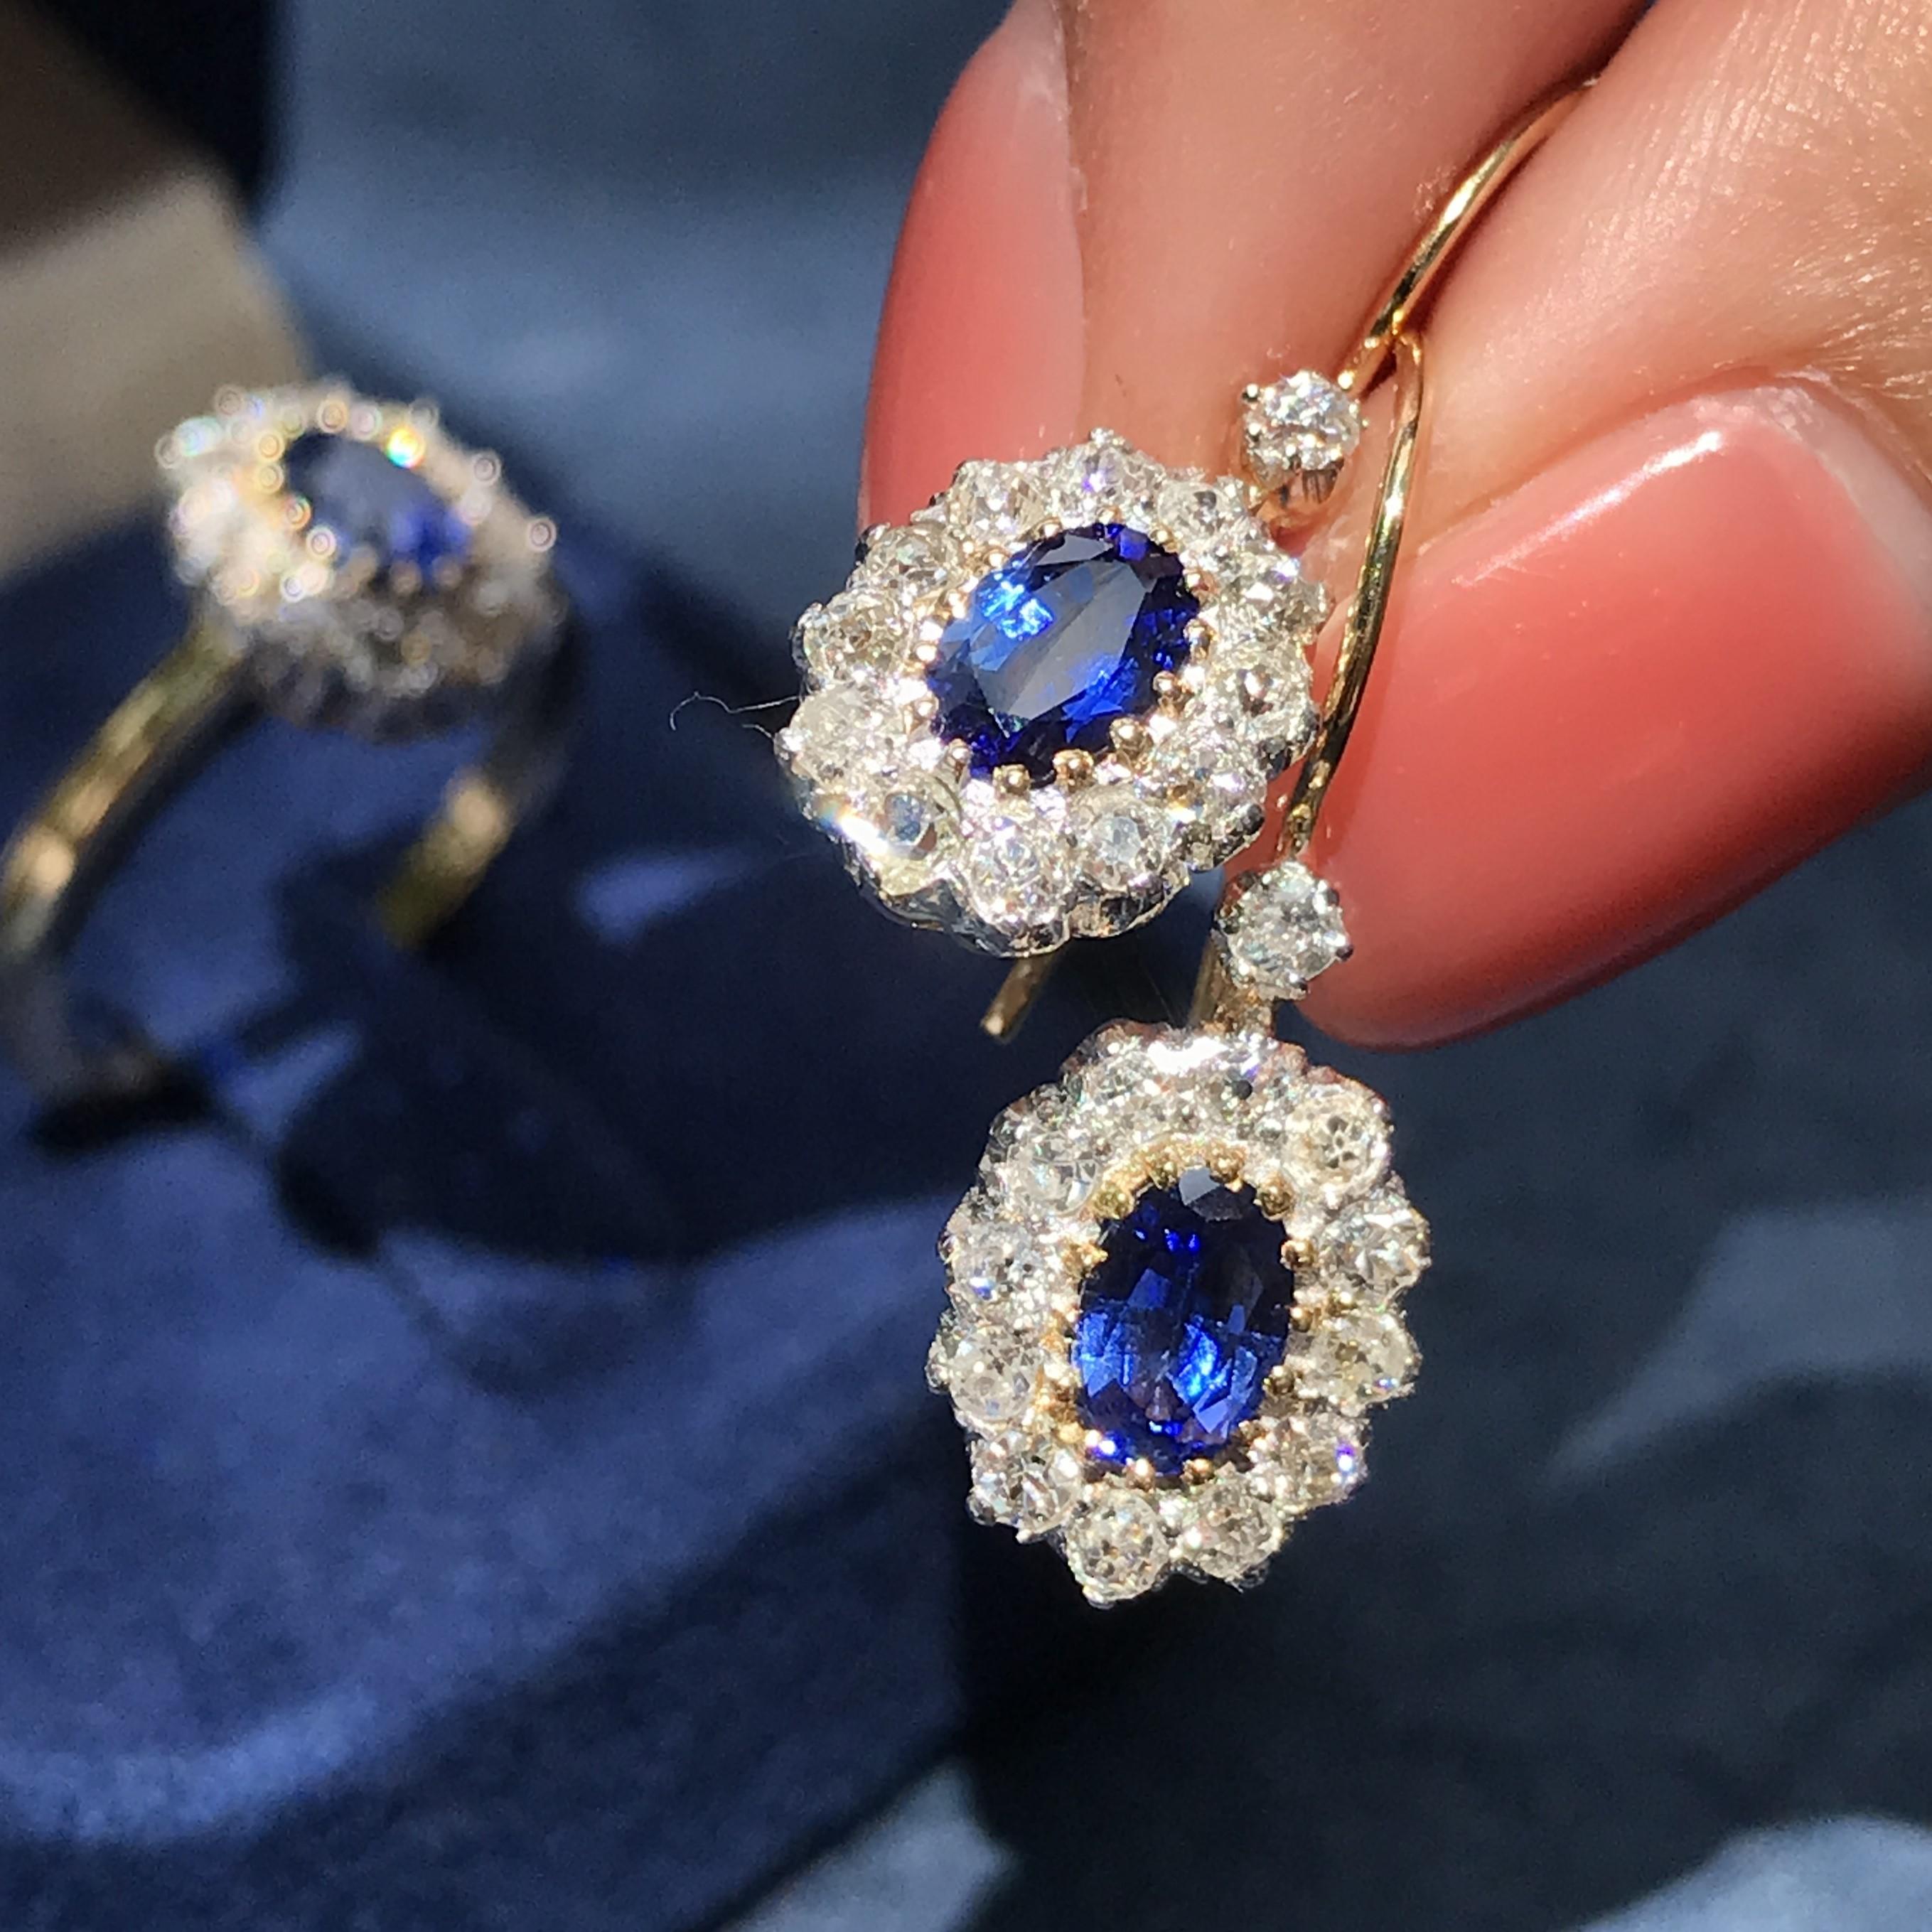 These classic and very versatile ear baubles, glisten in the centers with a pair of vibrant royal blue Ceylon sapphires enshrined in halos of round diamonds. Total diamond weight 0.91 carat. Match them with your favorite outfit to complete your